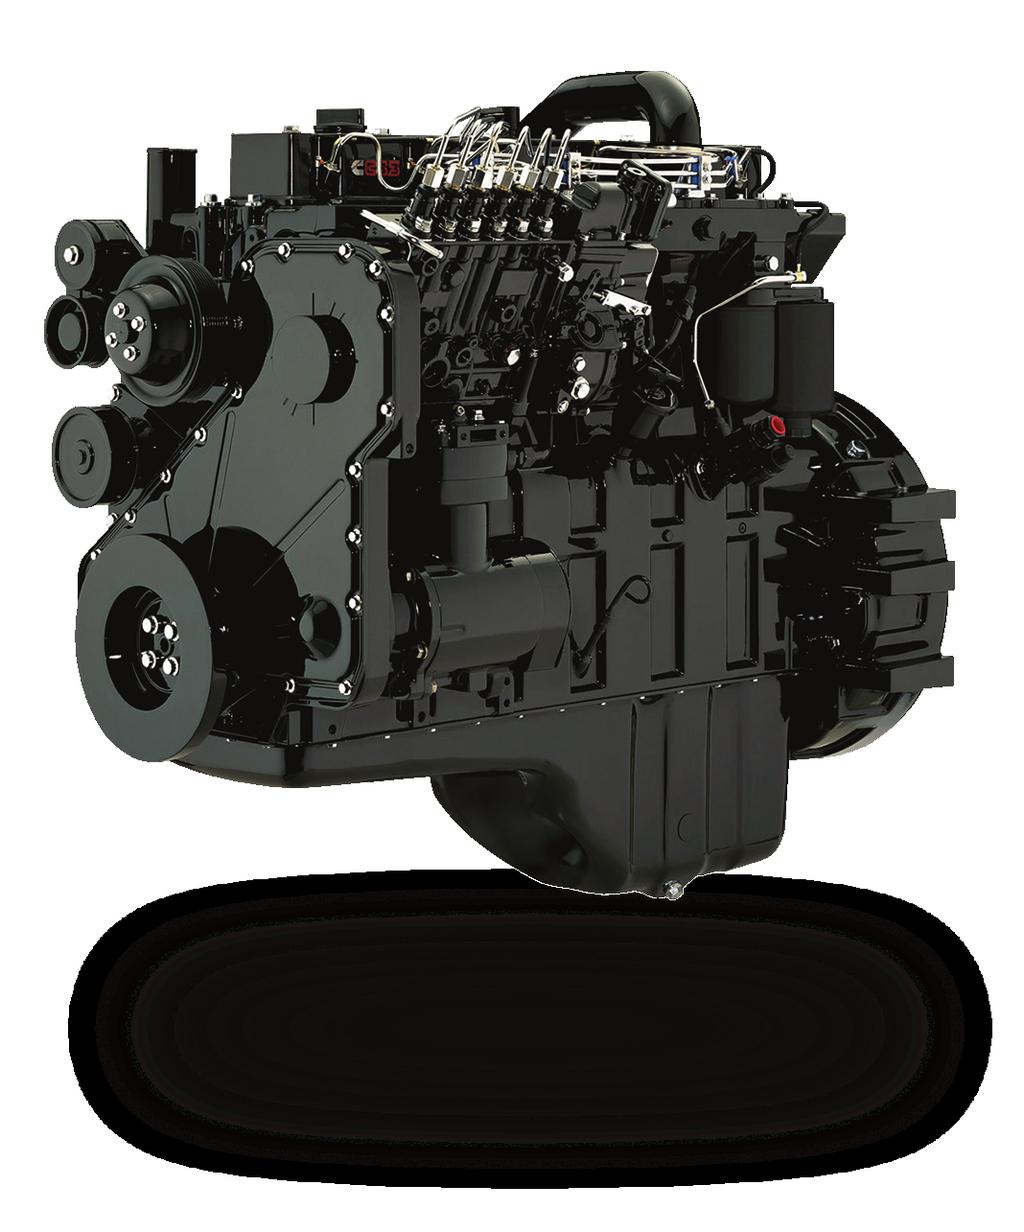 Cummins Engine In-Line Six Cylinder B series This Cummins B series engine with in-cylinder technology maintains a compact, simple and cost-effective design solution.